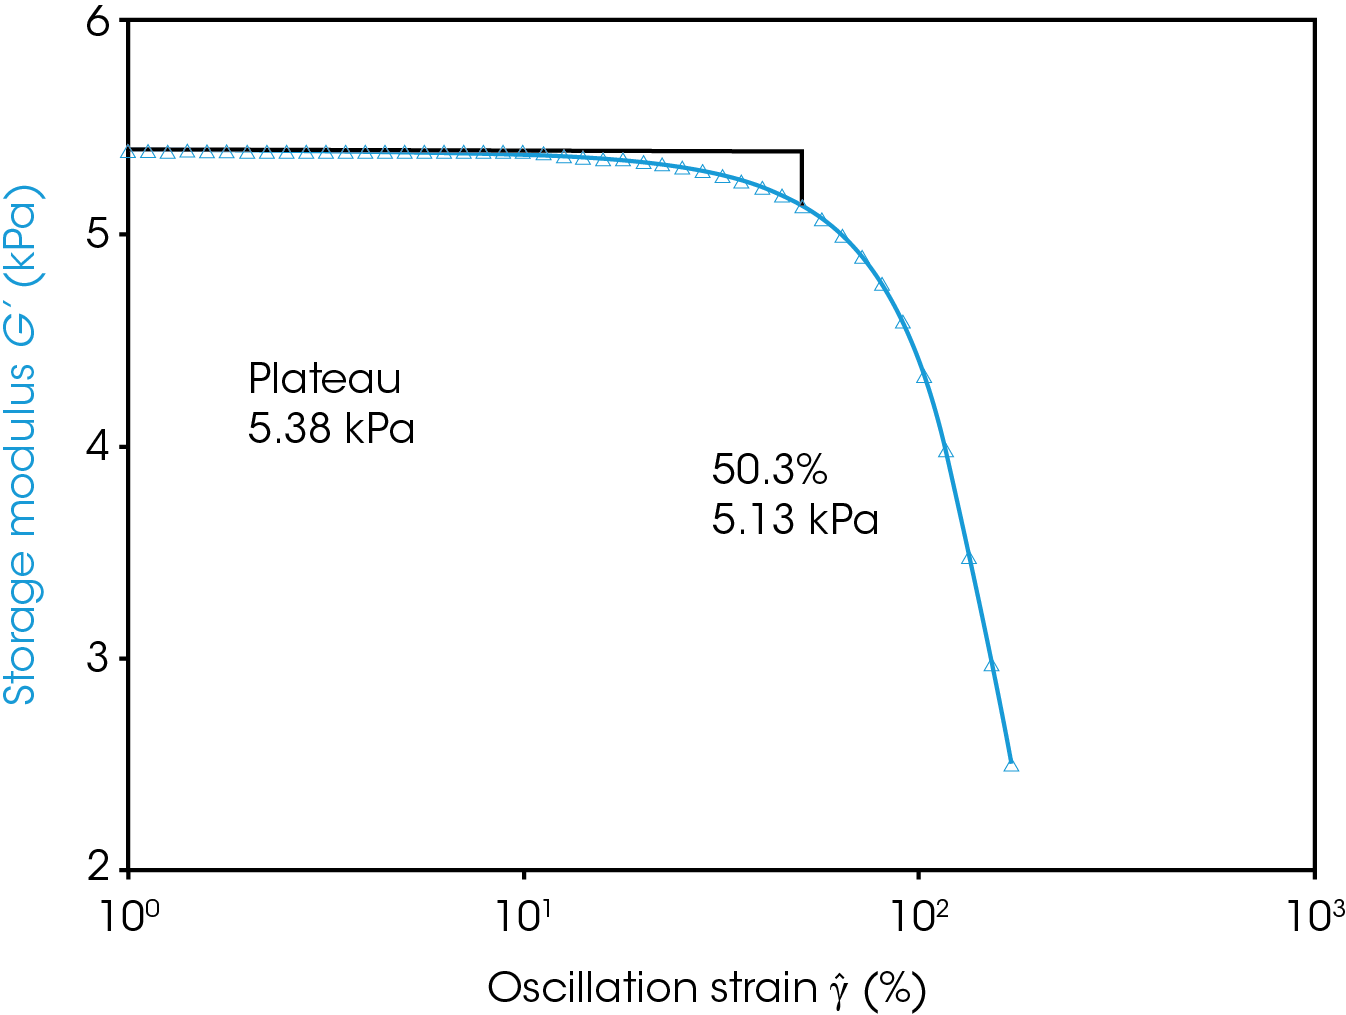 Figure 1. Strain sweep of polystyrene at 220 °C and 1Hz oscillation frequency. The plateau modulus was taken as the average from 1 to 10 % strain which shows no change in modulus with increasing strain and qualifies as a plateau. As the strain increases the storage modulus begins to drop. When the storage modulus has dropped by 5 % or more the strain is outside the linear viscoelastic region.